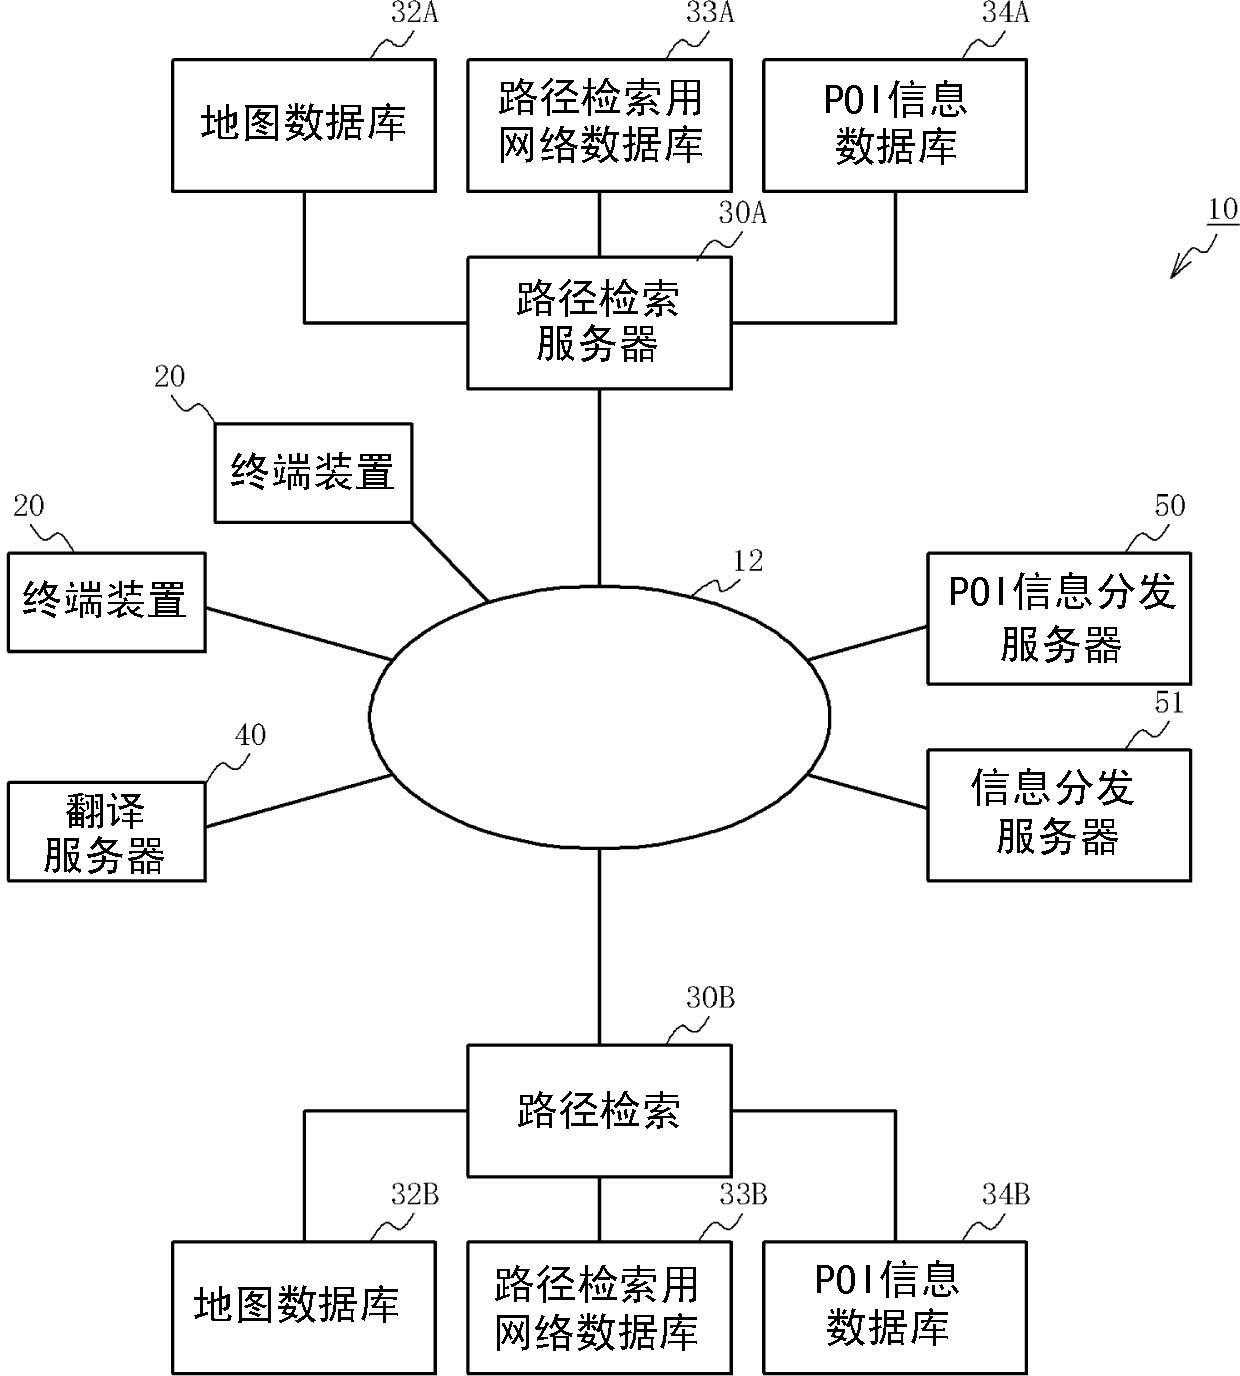 Navigation system, route search server, route search agent server, and navigation method